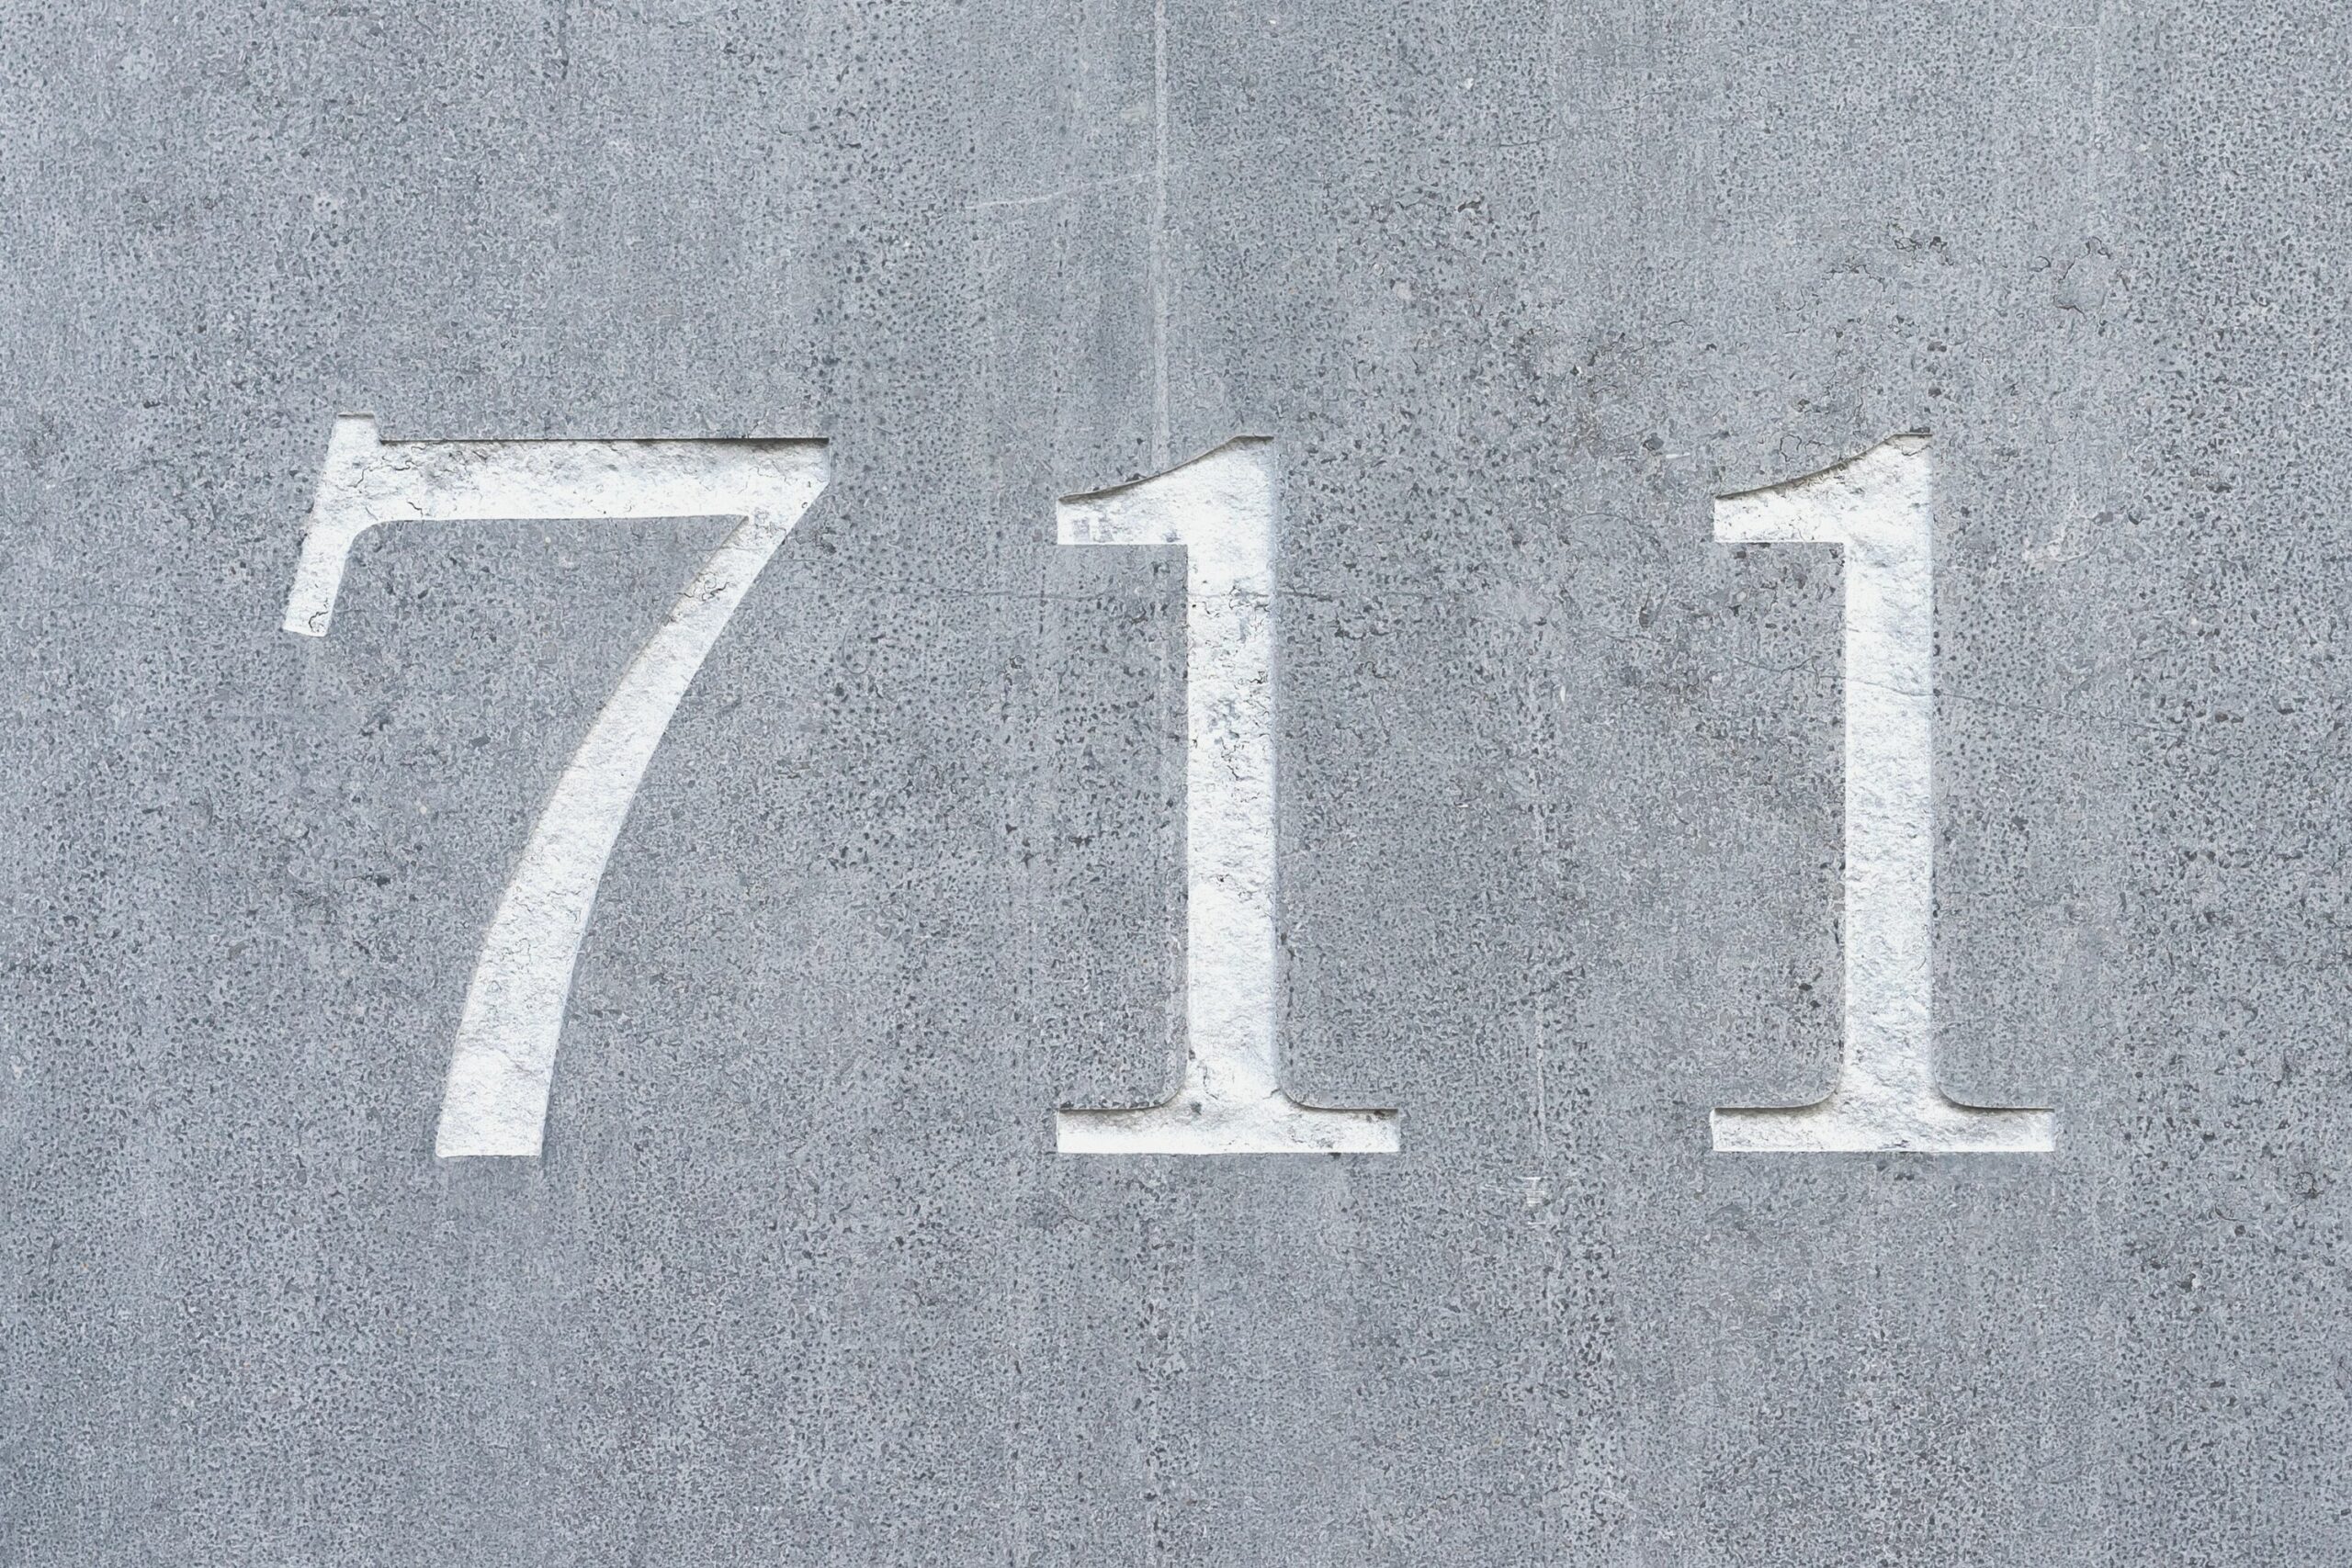 The numbers 711 etched in concrete